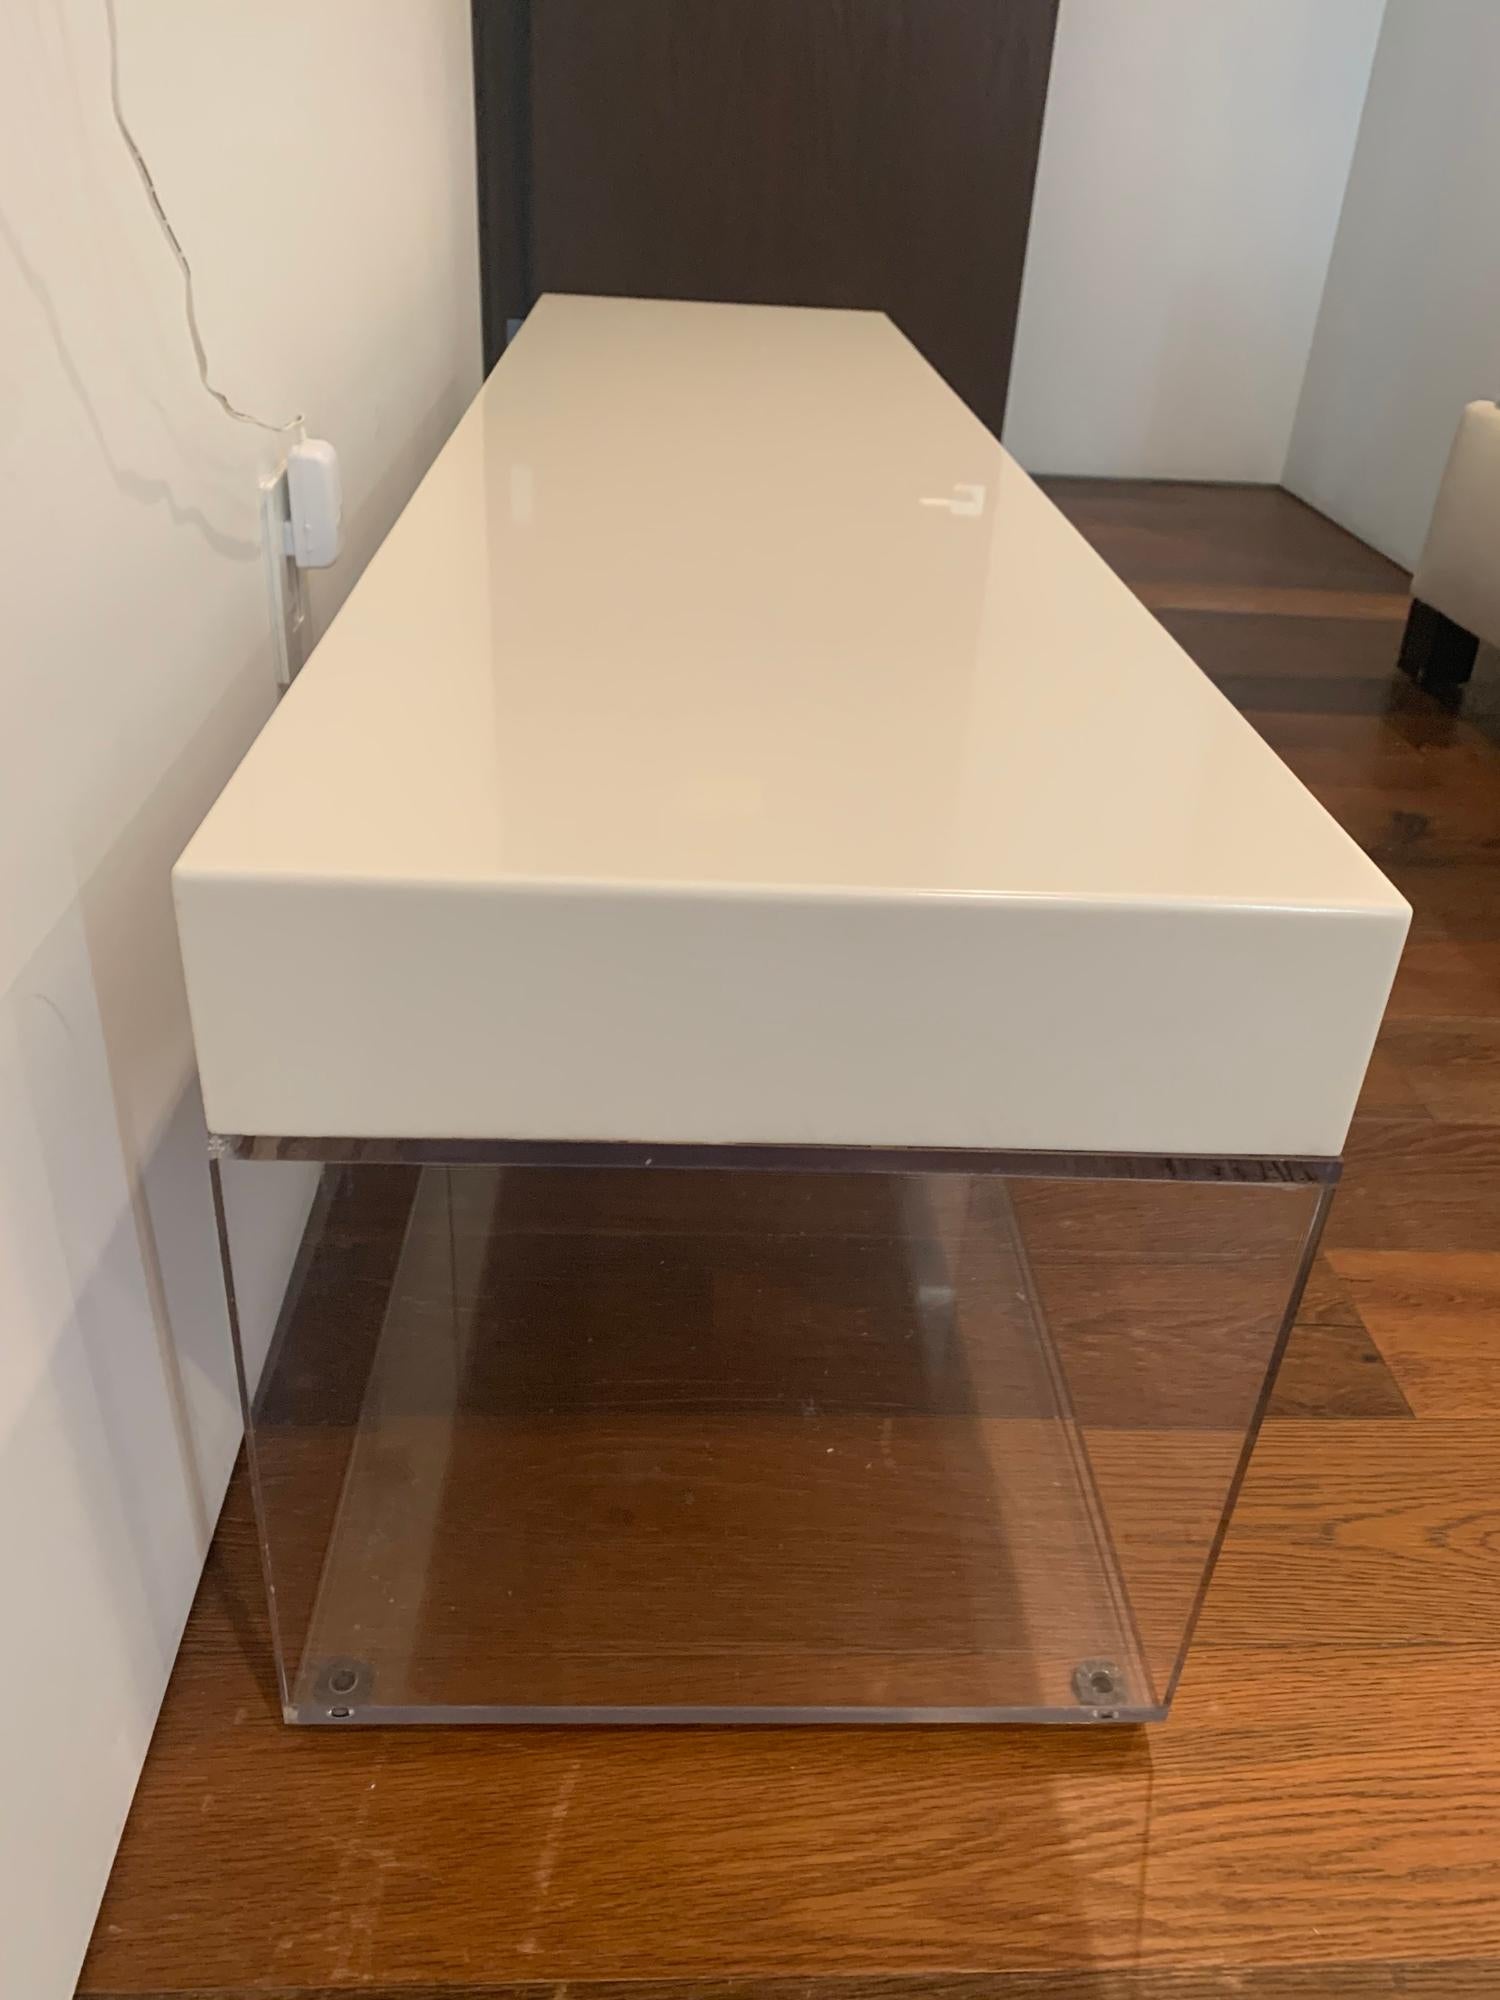 Beautiful bench designed and manufactured in Los Angeles by Cain Modern, the bench is very sturdy and well constructed, it can easily accommodate 3 people, the bottom can also be used for storage.
The piece is in used condition with surface